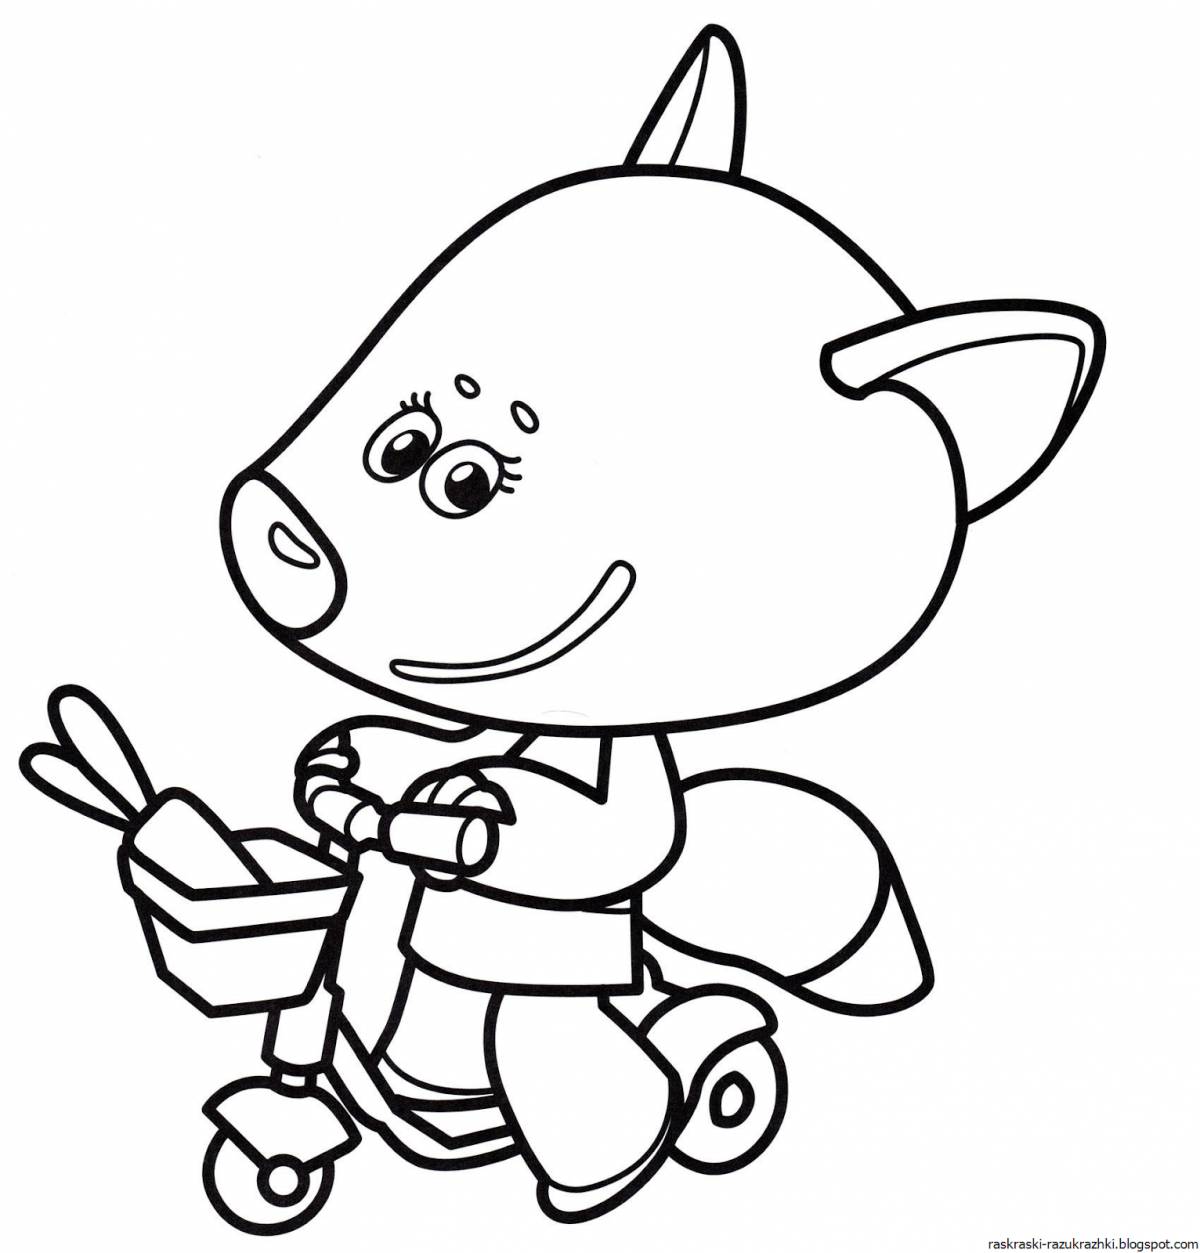 Brave bears coloring pages